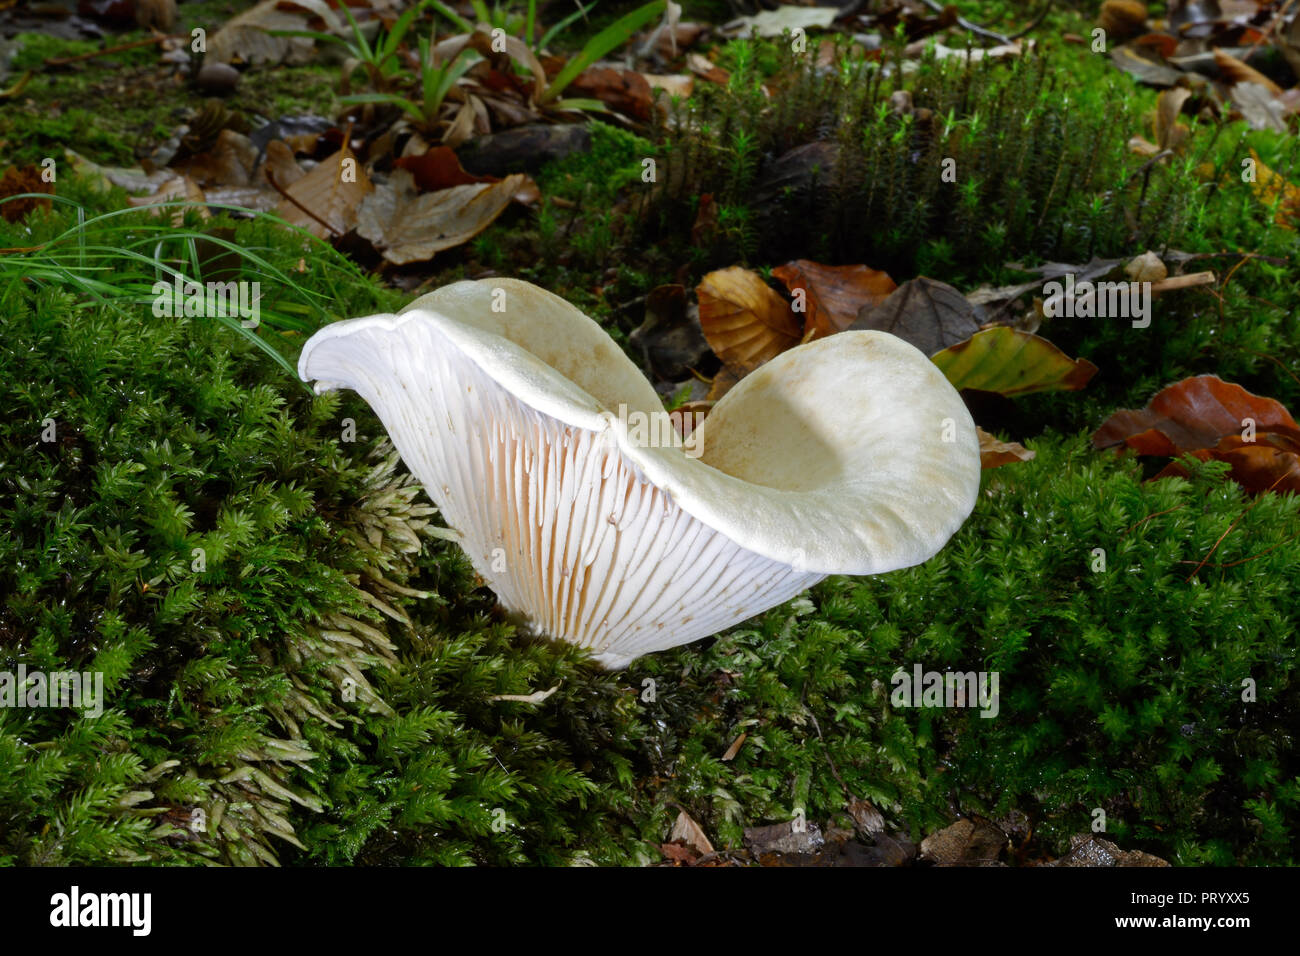 Lactifluus vellereus (previously Lactarius vellereus) is commonly known as the fleecy milk-cap. It is typically found in deciduous woods. Stock Photo